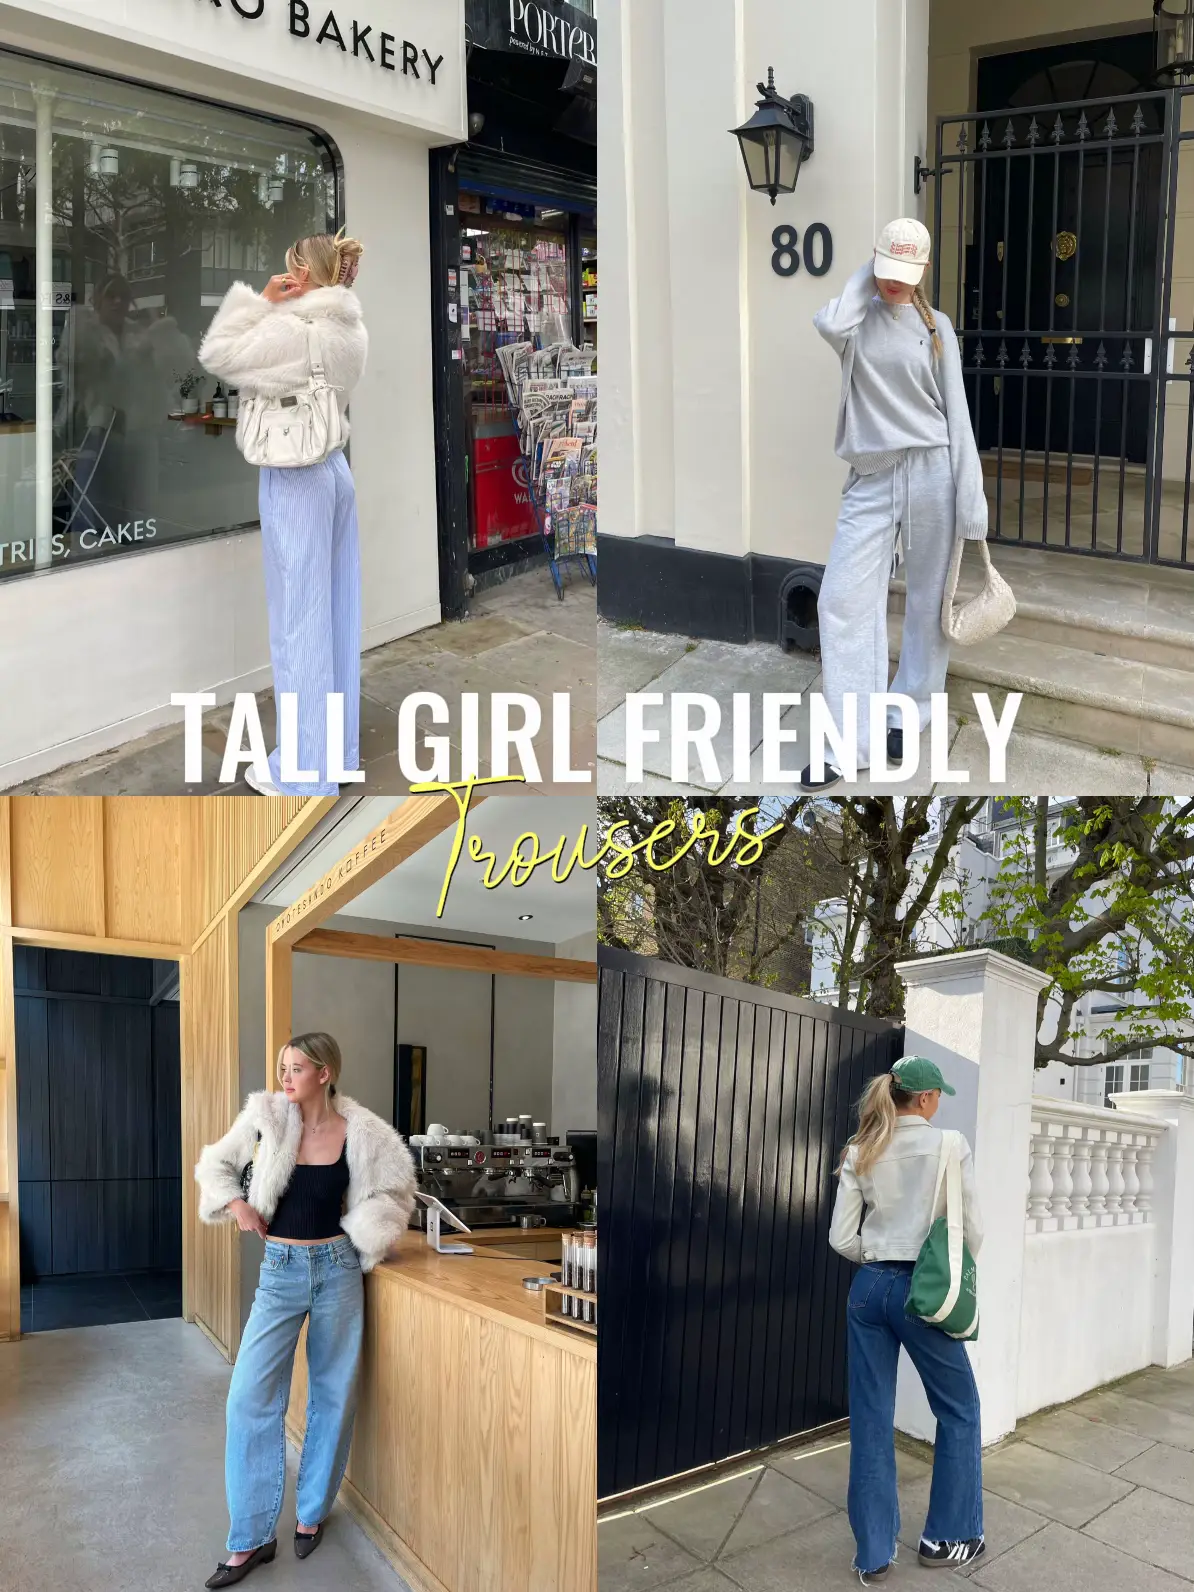 Fashion Brands Made for Tall Women - A Tall Girl's Guide to Cozy Weather  Shopping